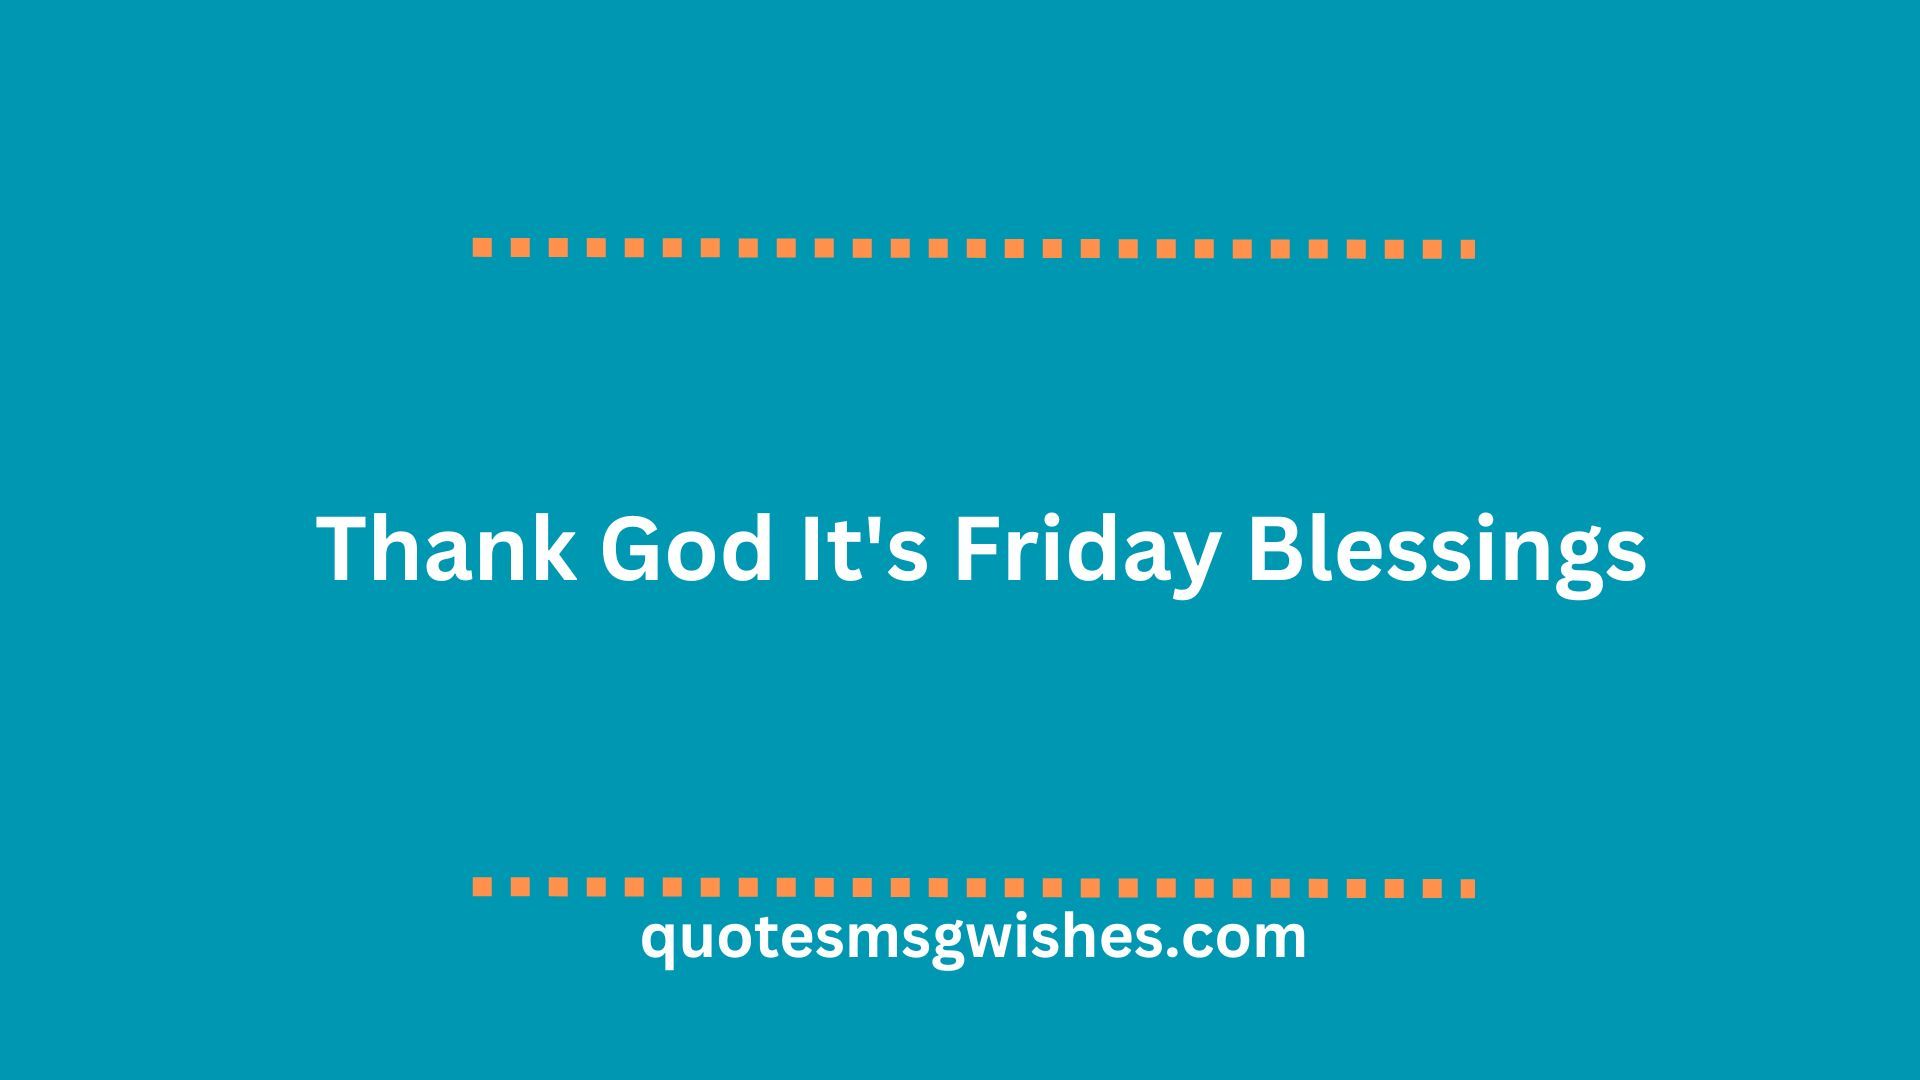 Thank God It's Friday Blessings